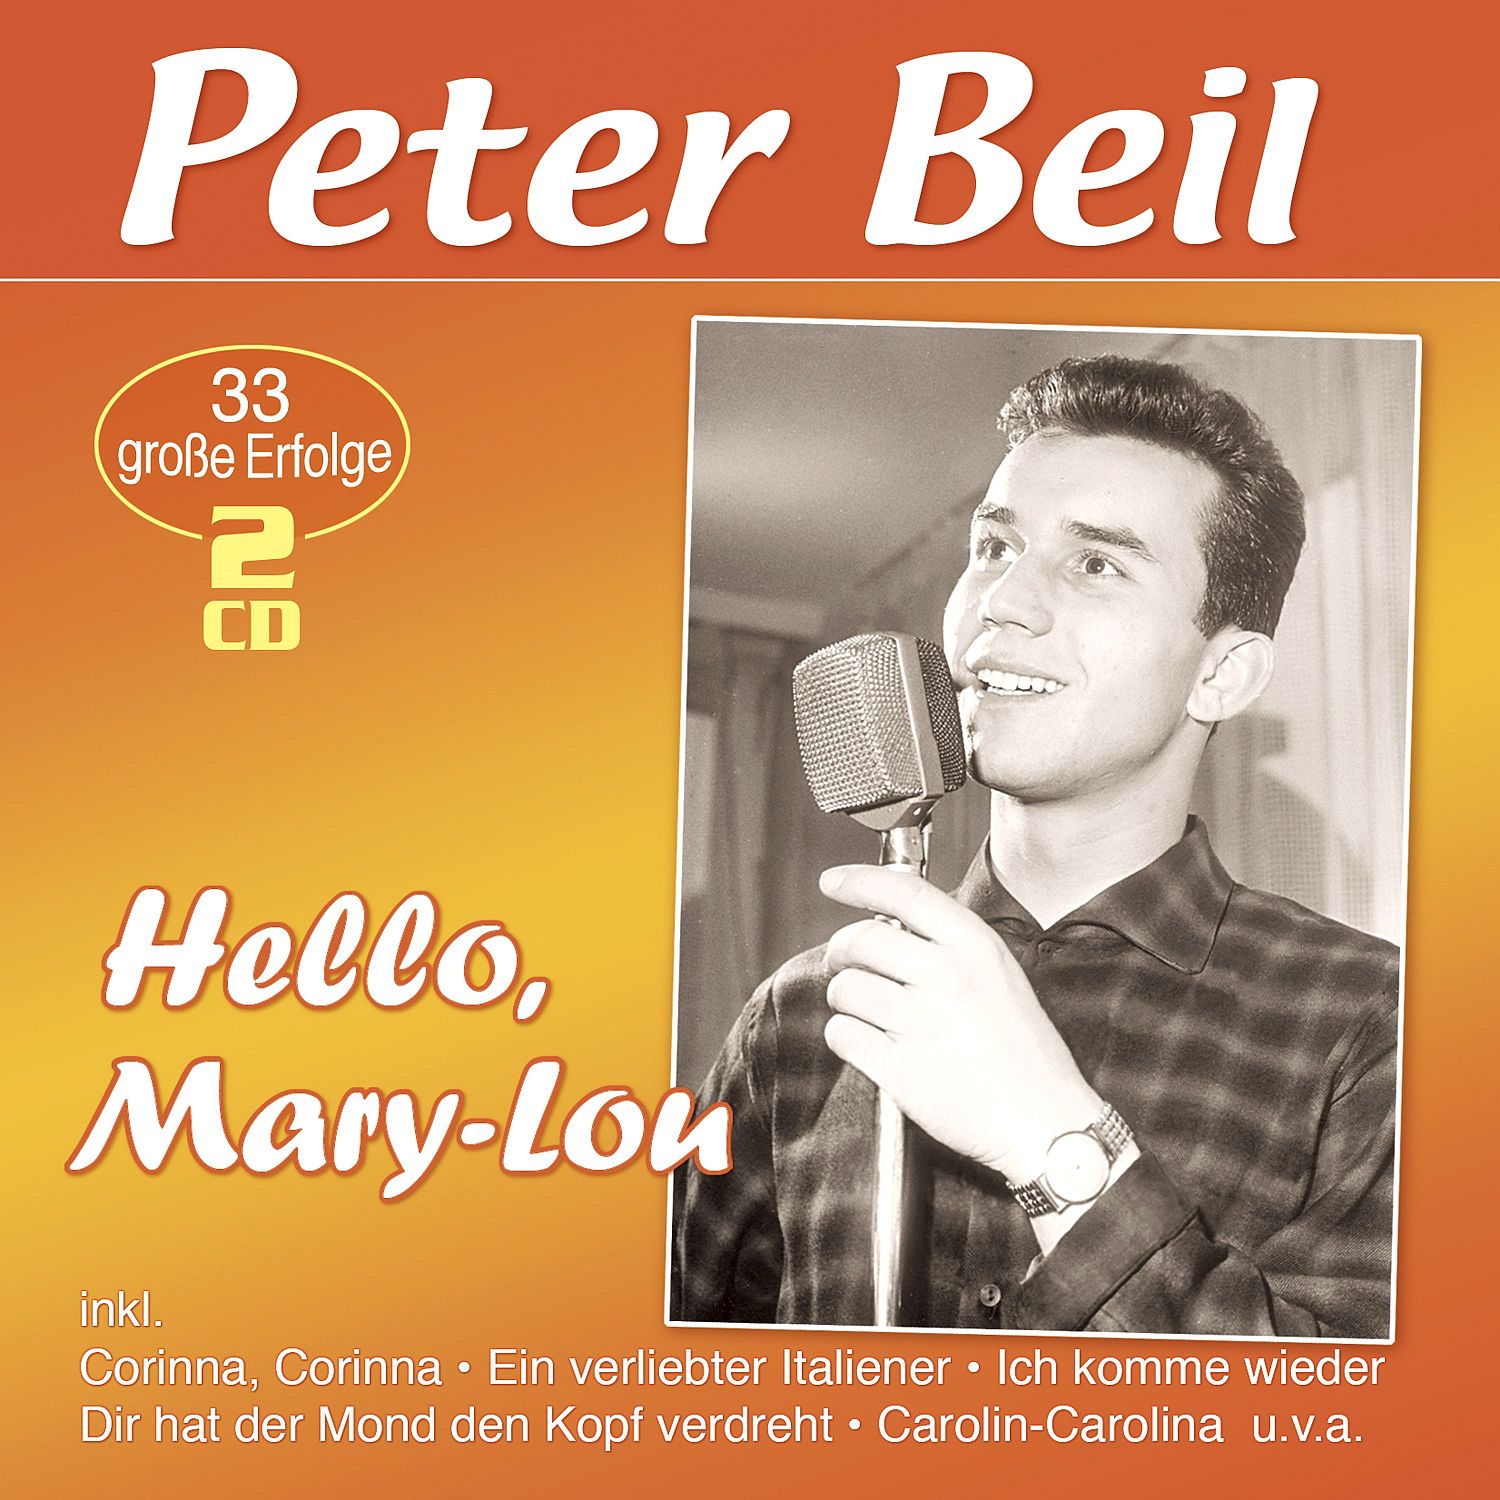 Beil, Peter - Hello, Mary-Lou - 33 große Erfolge